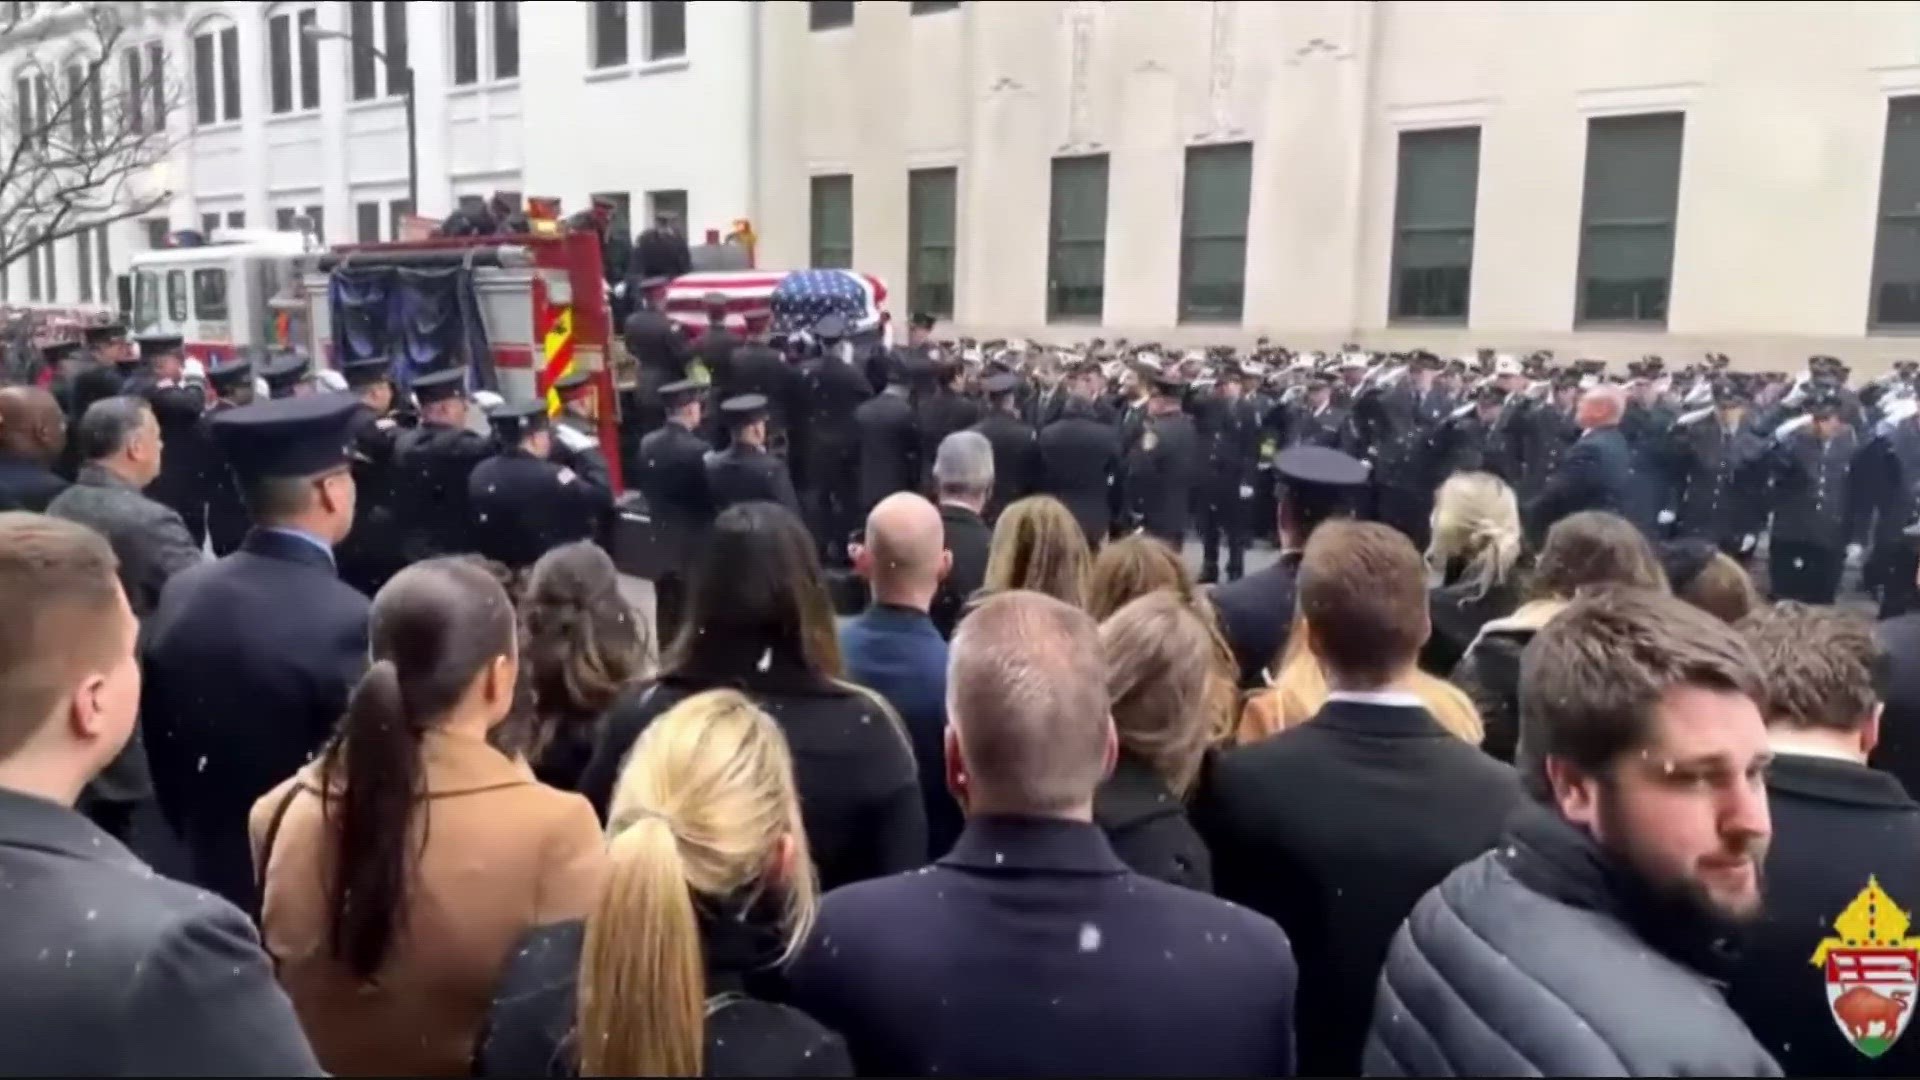 People who are not firefighters turned out to watch and pay respects in their own way.